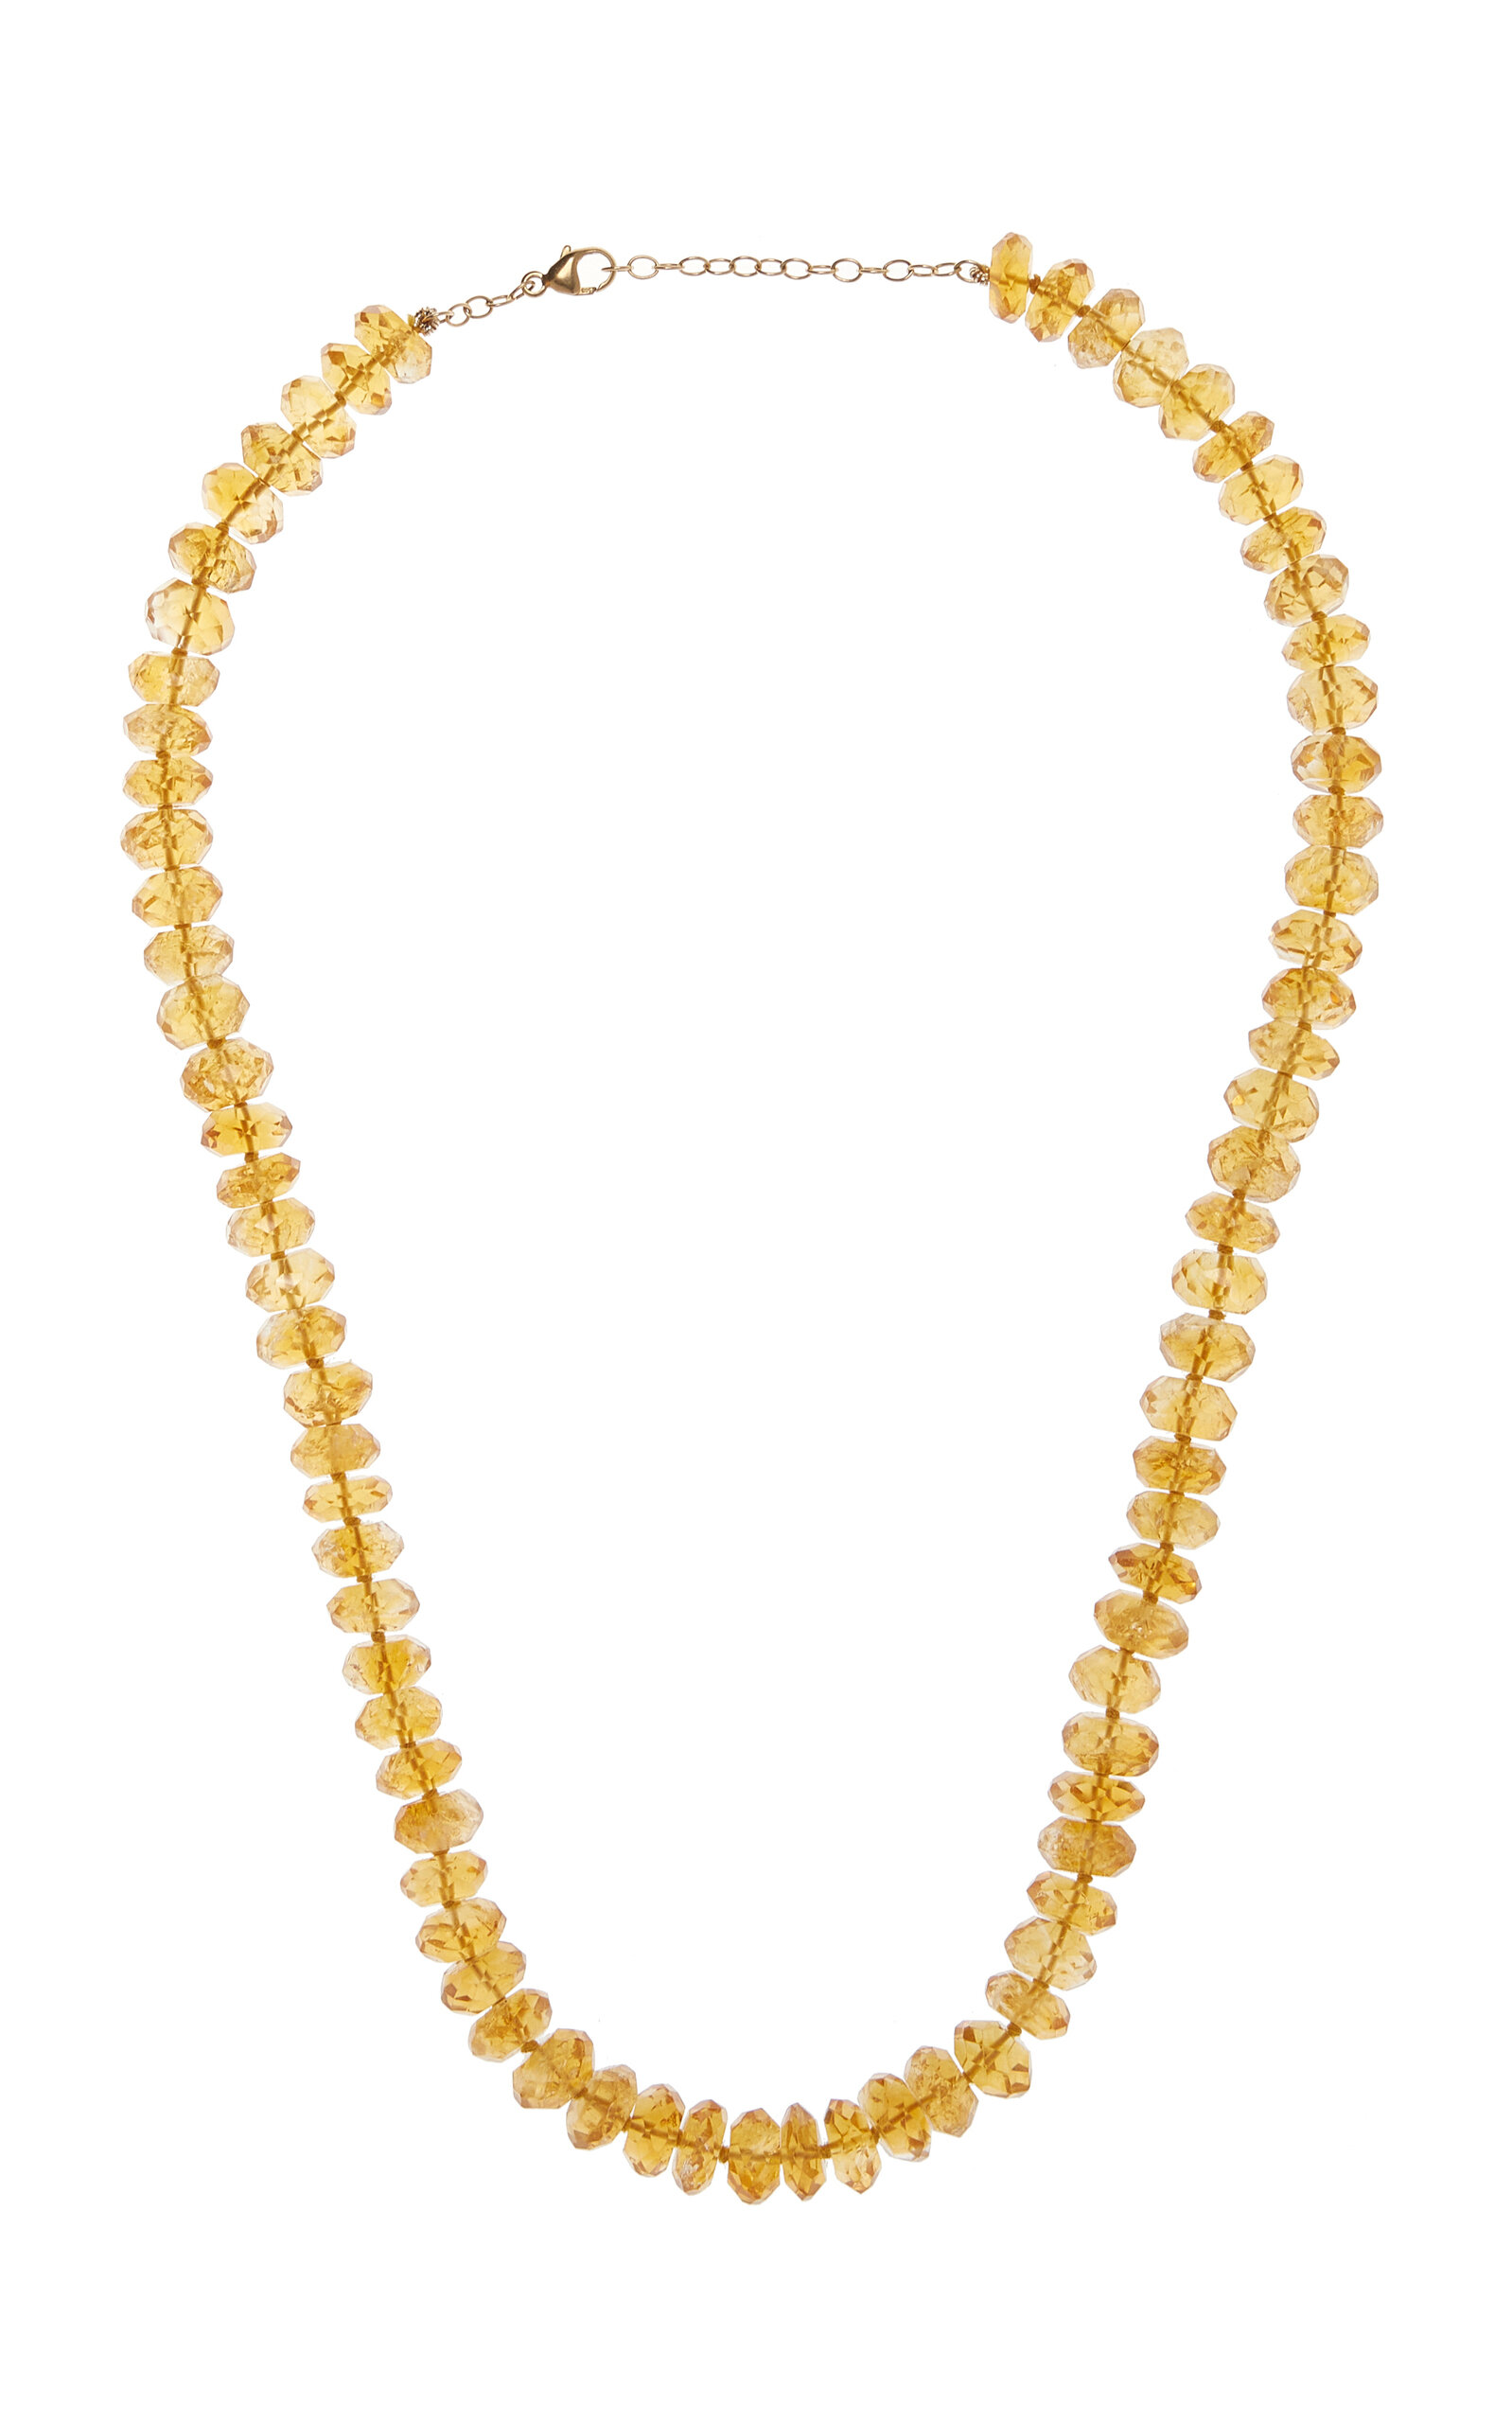 Jia Jia 14k Yellow Gold Citrine Necklace